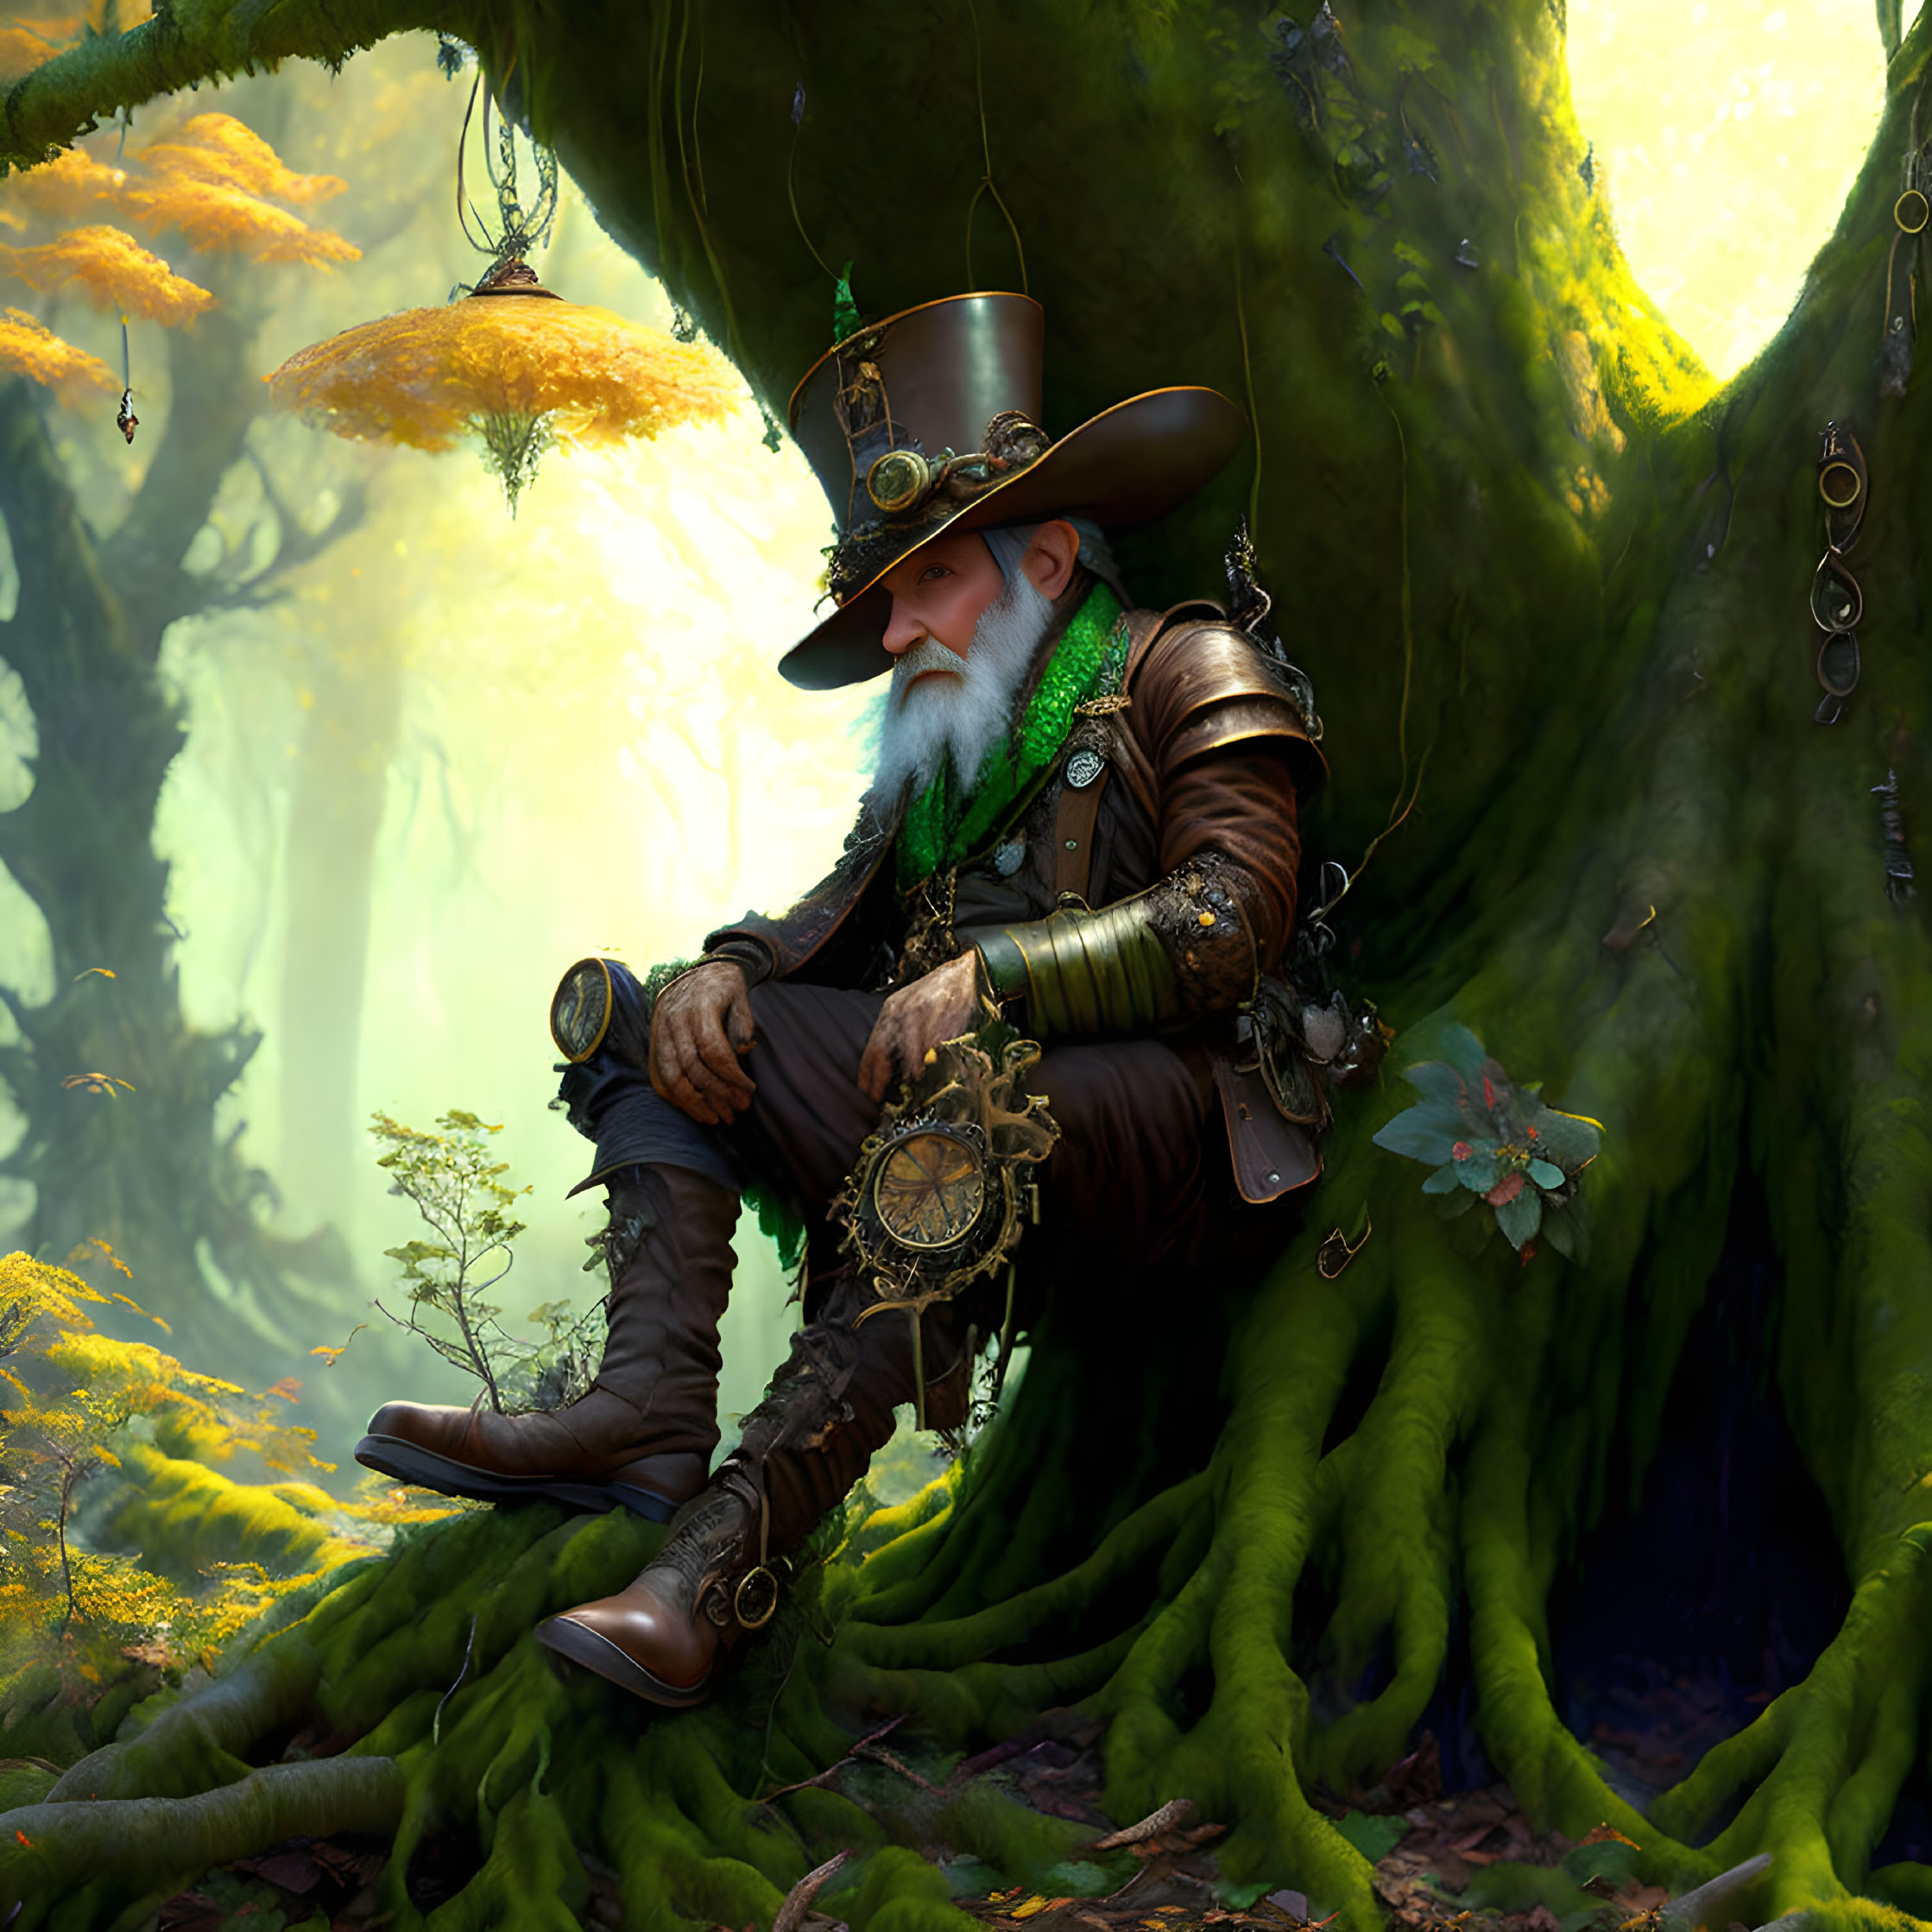 Steampunk-themed leprechaun with green beard in enchanted forest